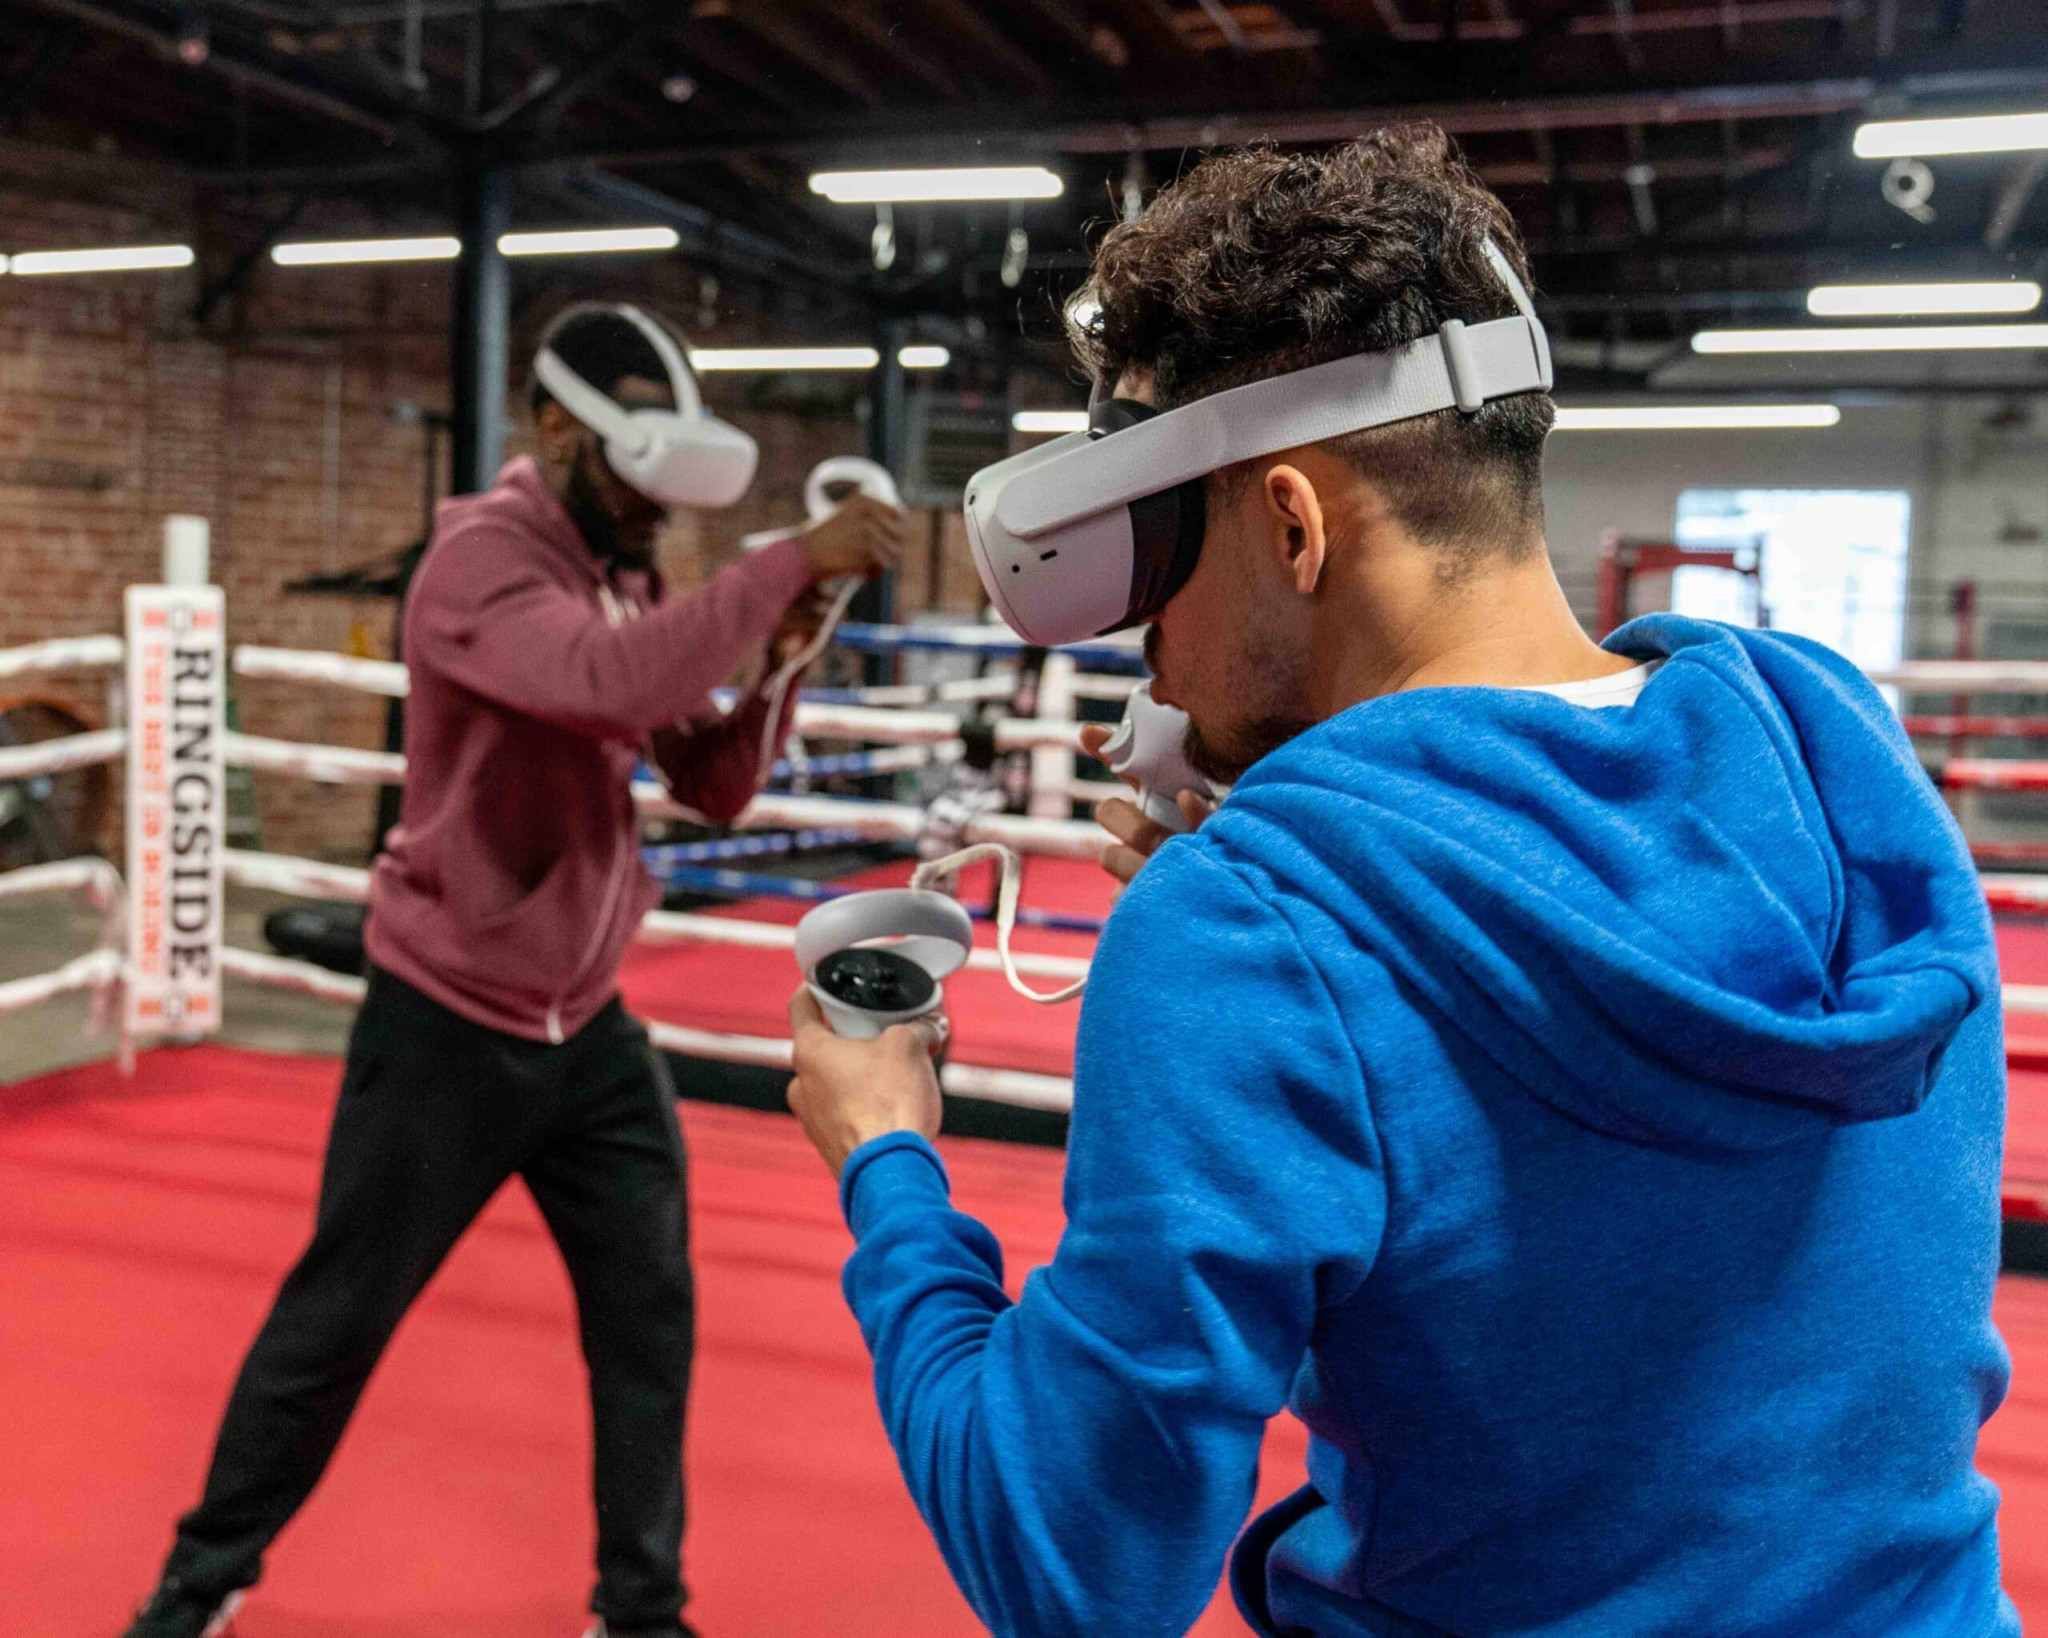 USA Boxing teams up with Engine Room to create virtual reality game Golden Gloves VR